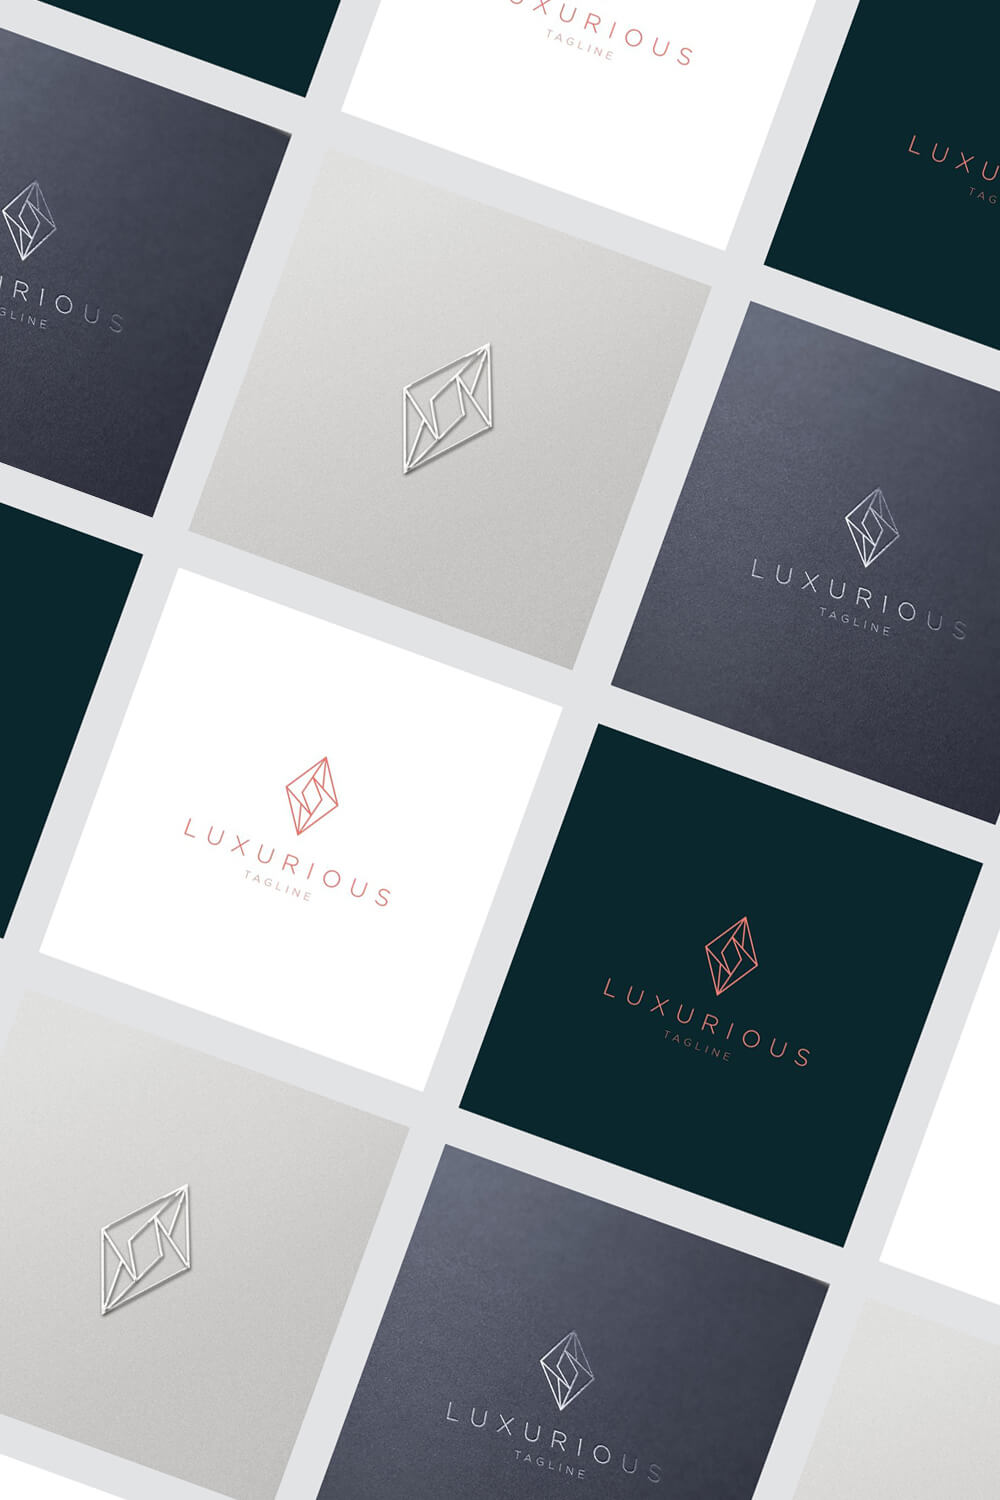 Many variants of the luxury jewelry logo in the form of small squares placed at an angle on a light gray background.